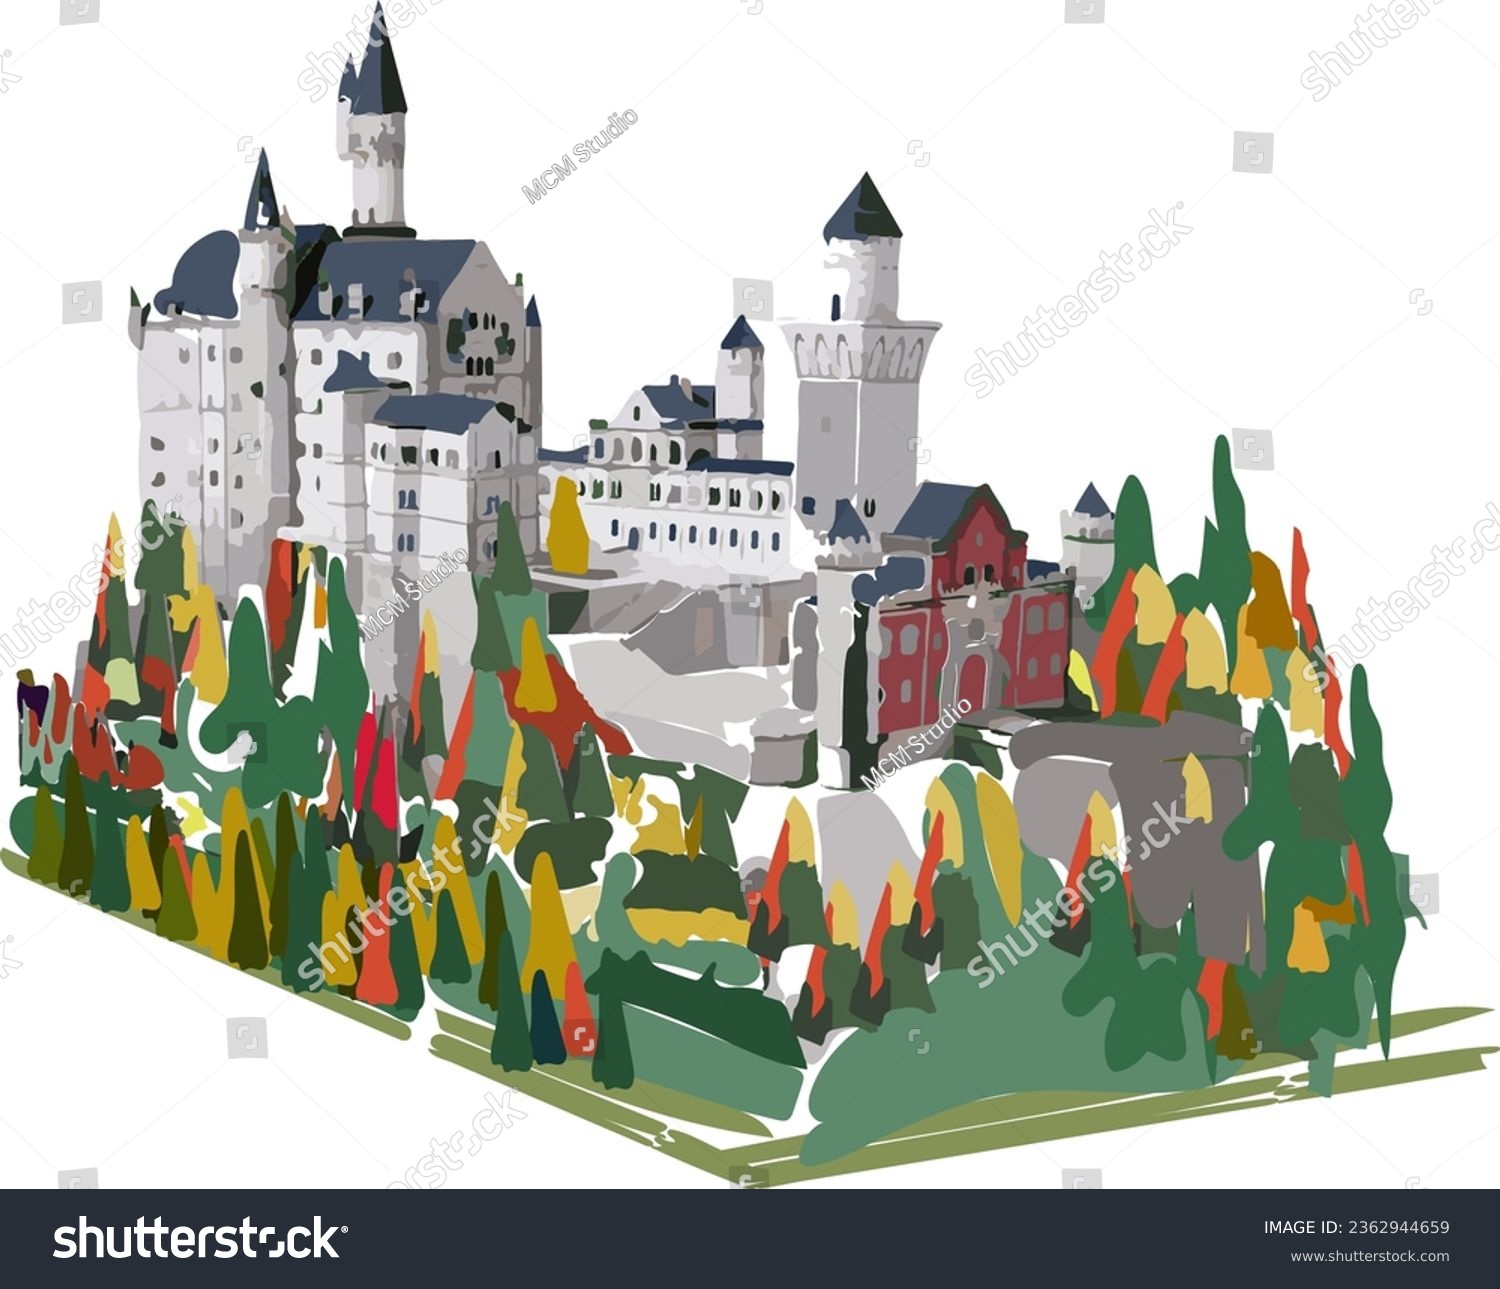 SVG of Neuschwanstein castle in Germany with view of buildings, trees and no mountains in full color vector svg